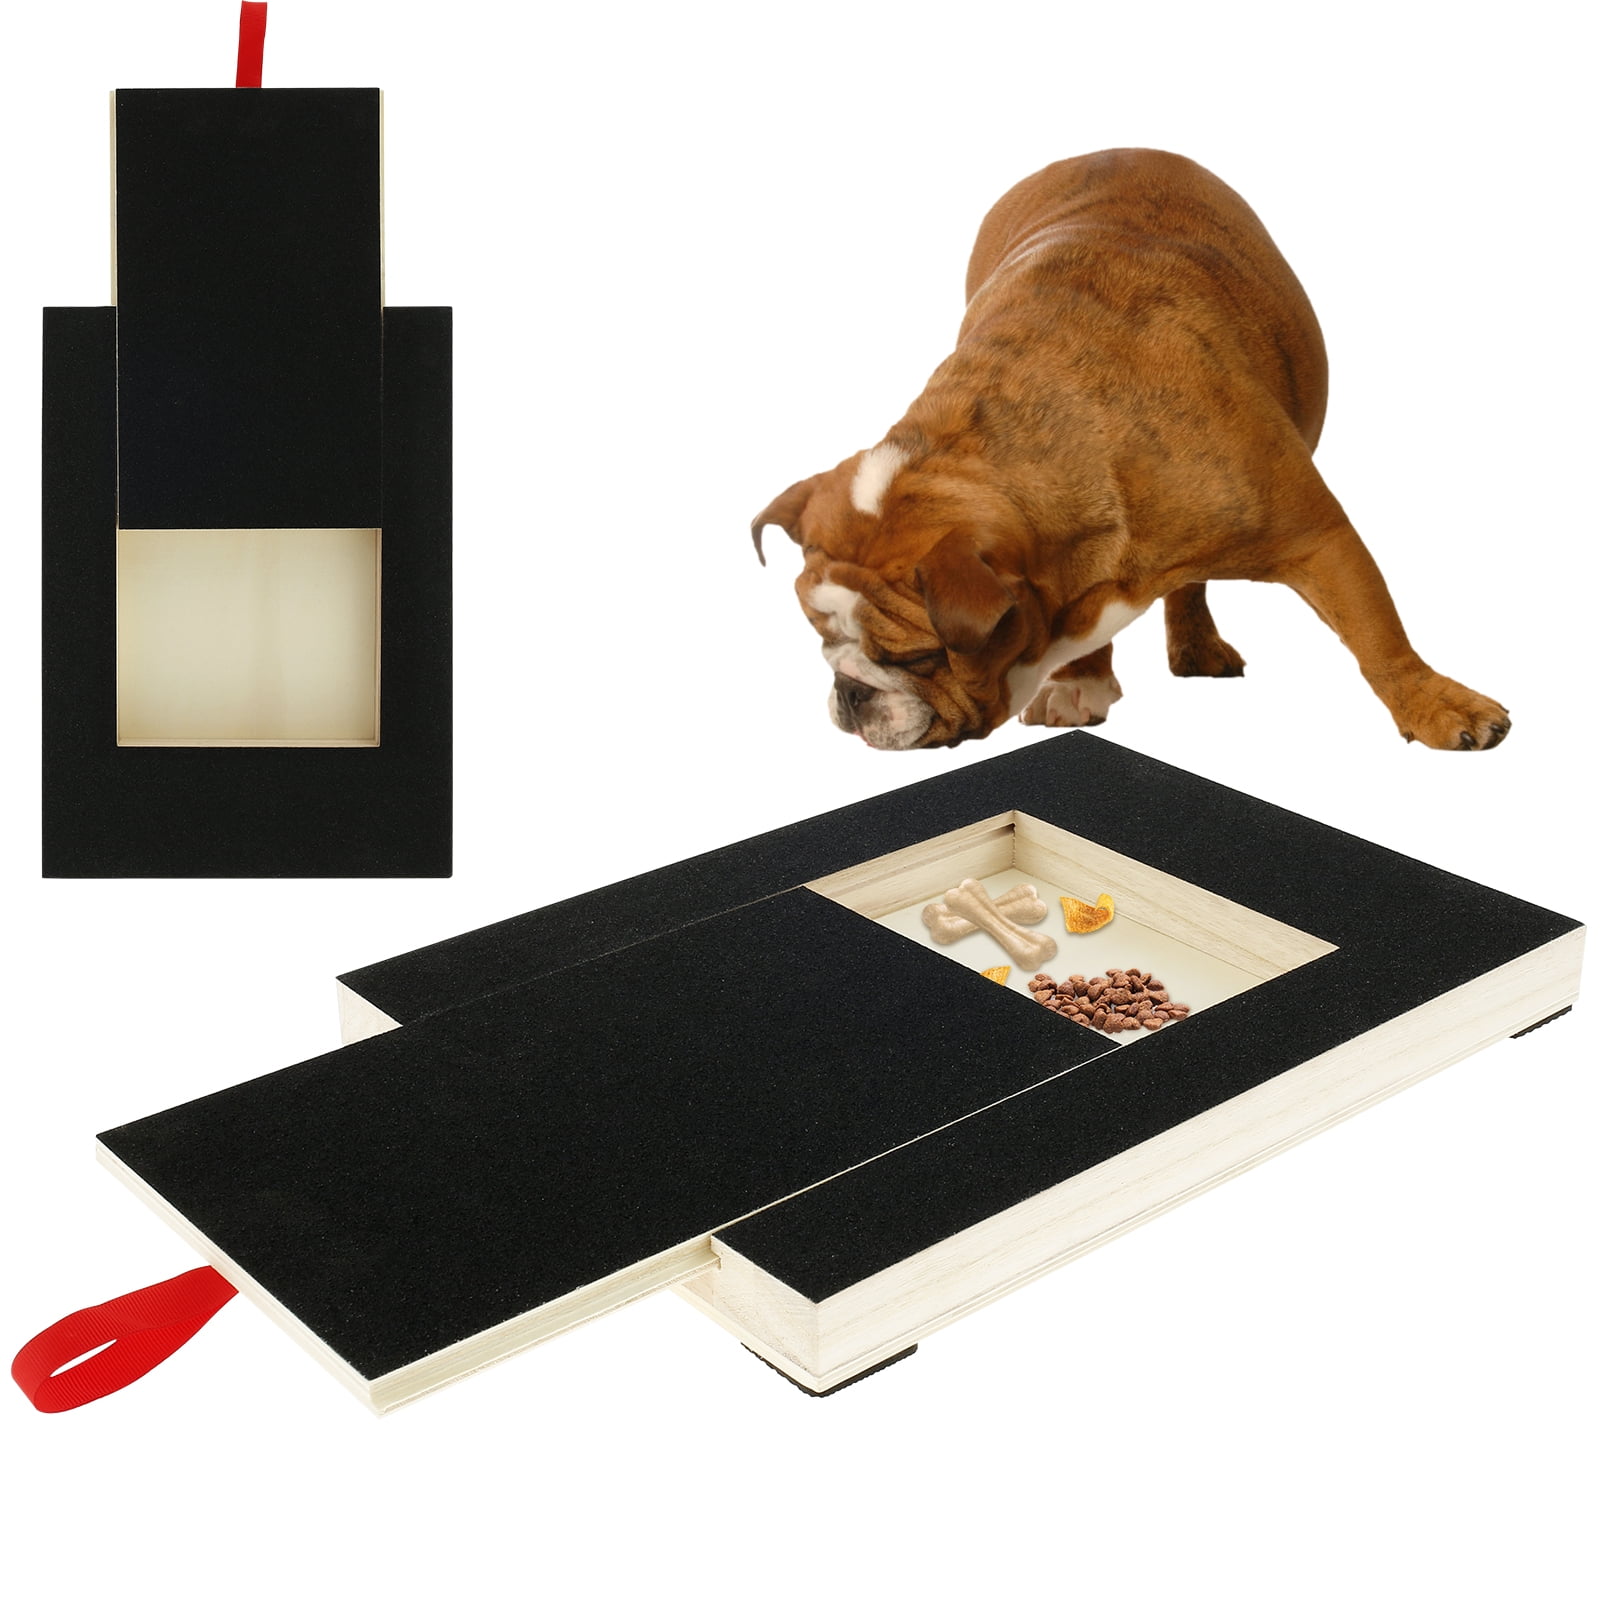 Tcwhniev Dog Scratch Pad for Nails Dog Nail Square Scratching Board Sandpaper with Built in Snack Box Scratch Board File for Puppy Black 2f787a7e 2a6d 4c64 9584 ece137147d56.2ef4ed86f91c89d352173ee1af60754c